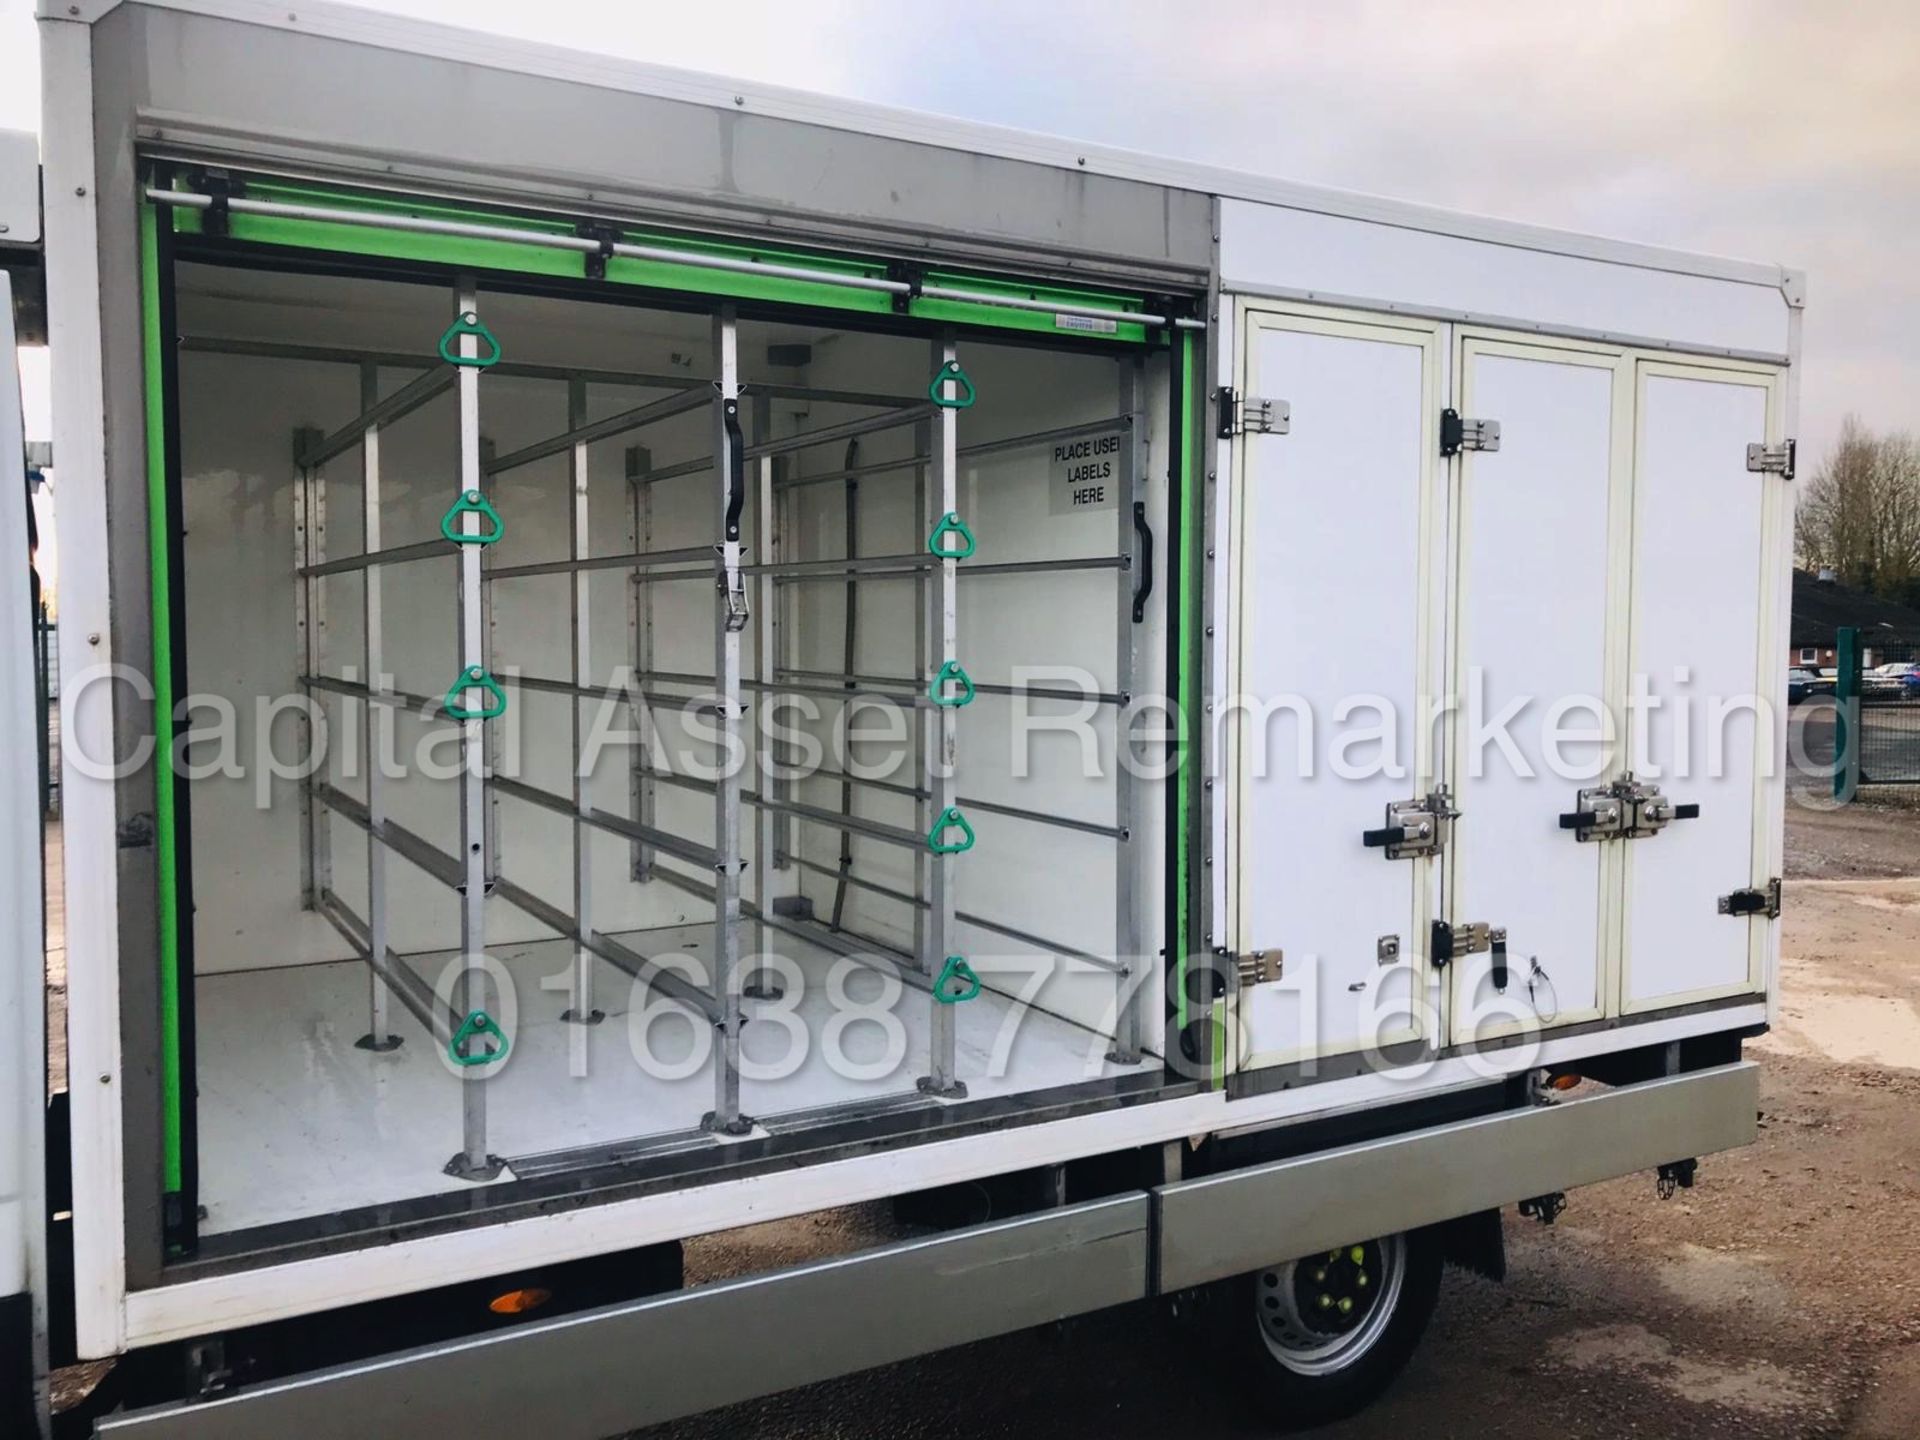 (ON SALE) IVECO DAILY 35S11 *LWB - REFRIGERATED BOX* (2015 - NEW MODEL) '2.3 DIESEL - 8 SPEED AUTO' - Image 35 of 37